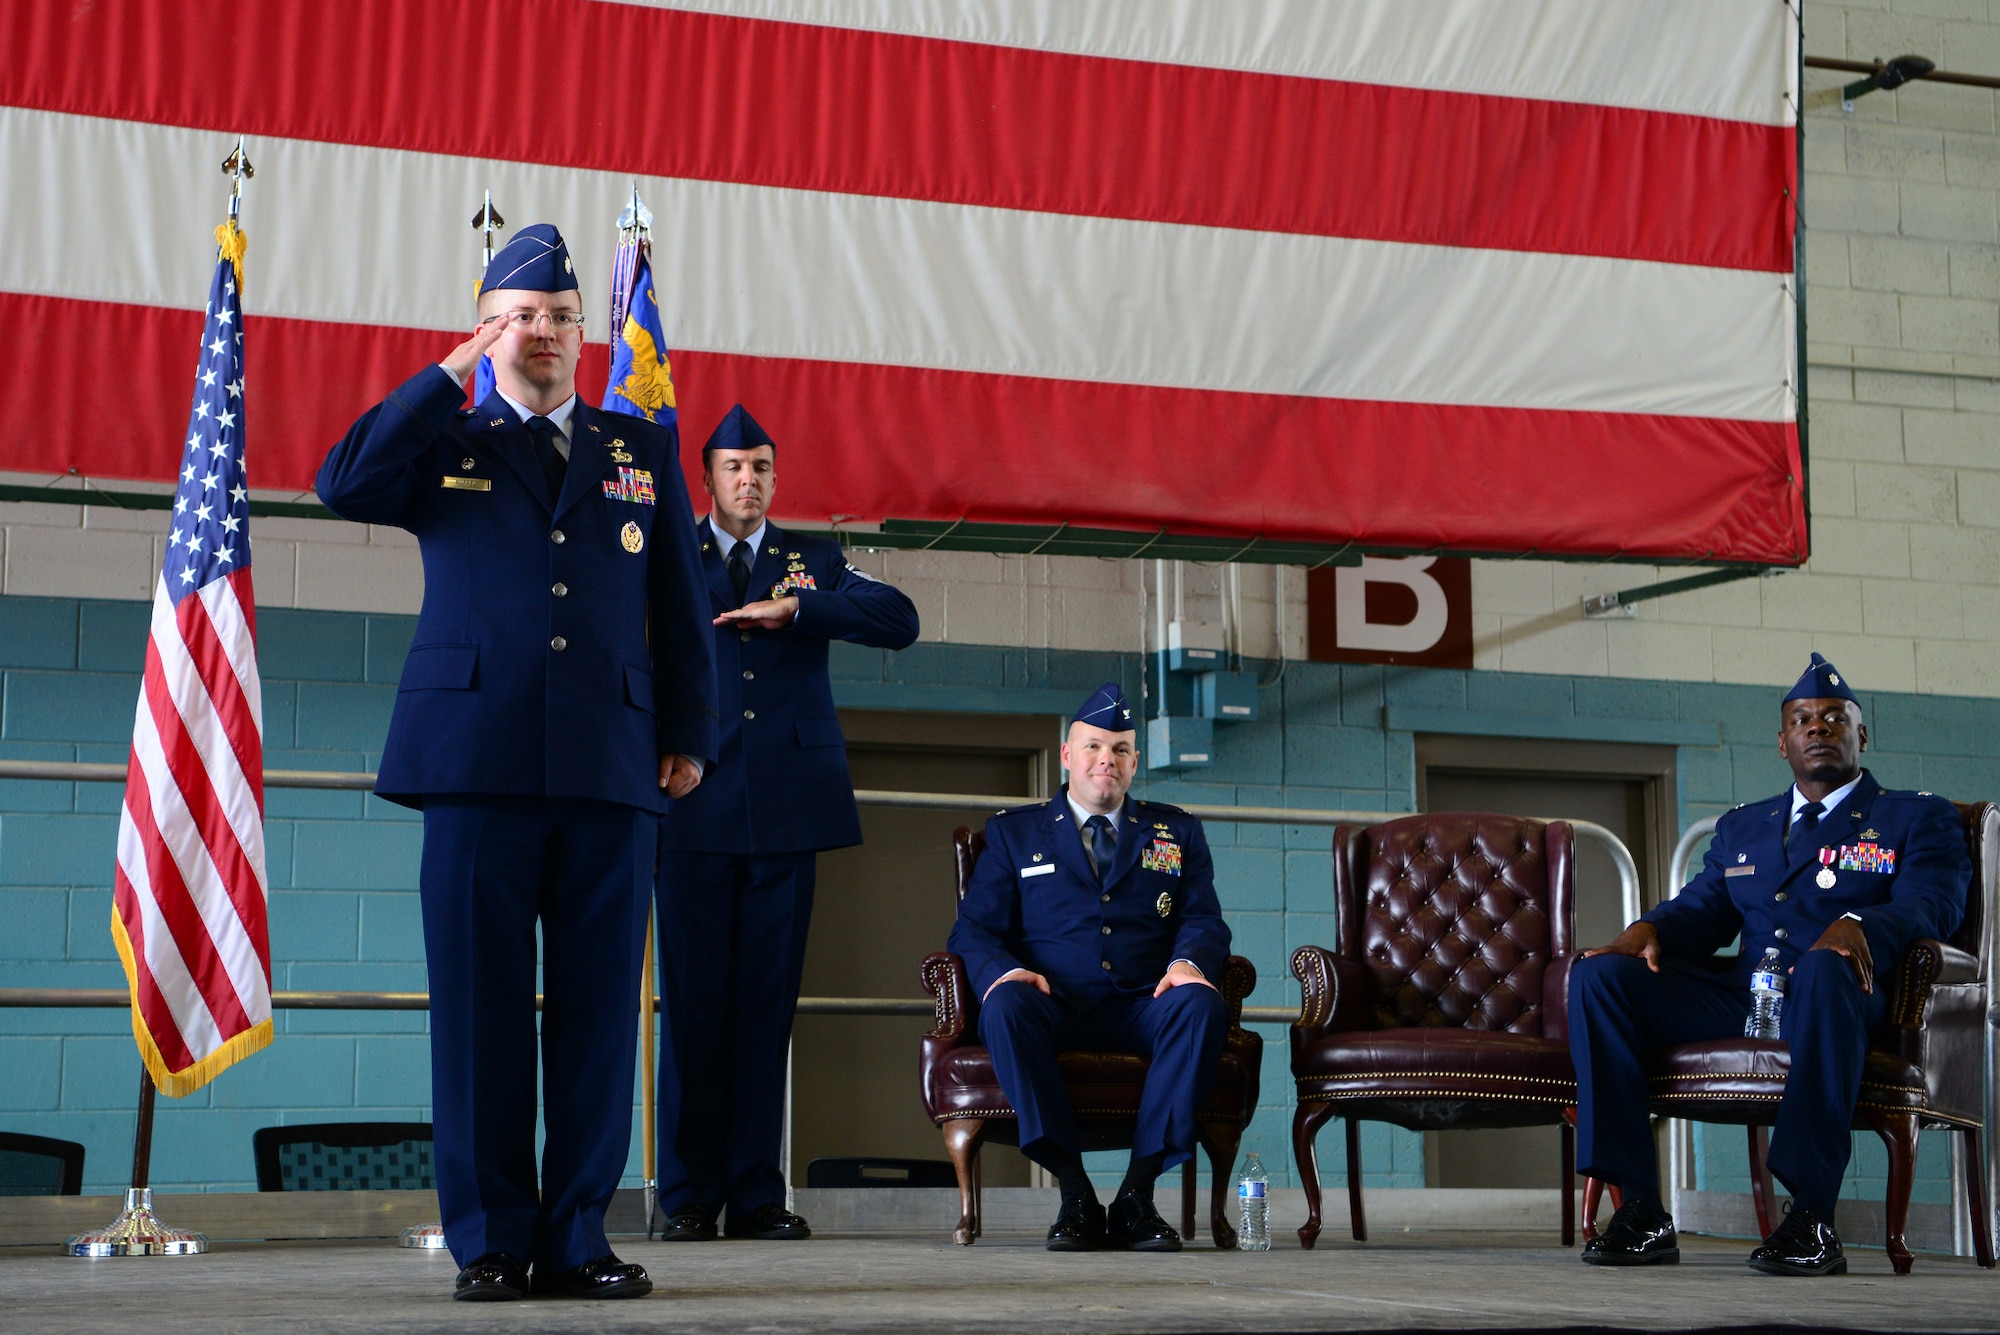 U.S. Air Force Lt. Col. Scott Ruppel, 58th Aircraft Maintenance Squadron commander, receives his first salute at the 58th AMXS change of command ceremony at Kirtland Air Force Base, N.M., July 6. Ruppel's previous assignment was the UH-1N replacement and CV-22 Program element monitor, Pentagon, Va. (U.S. Air Force photo by SrA Eli Chevalier)